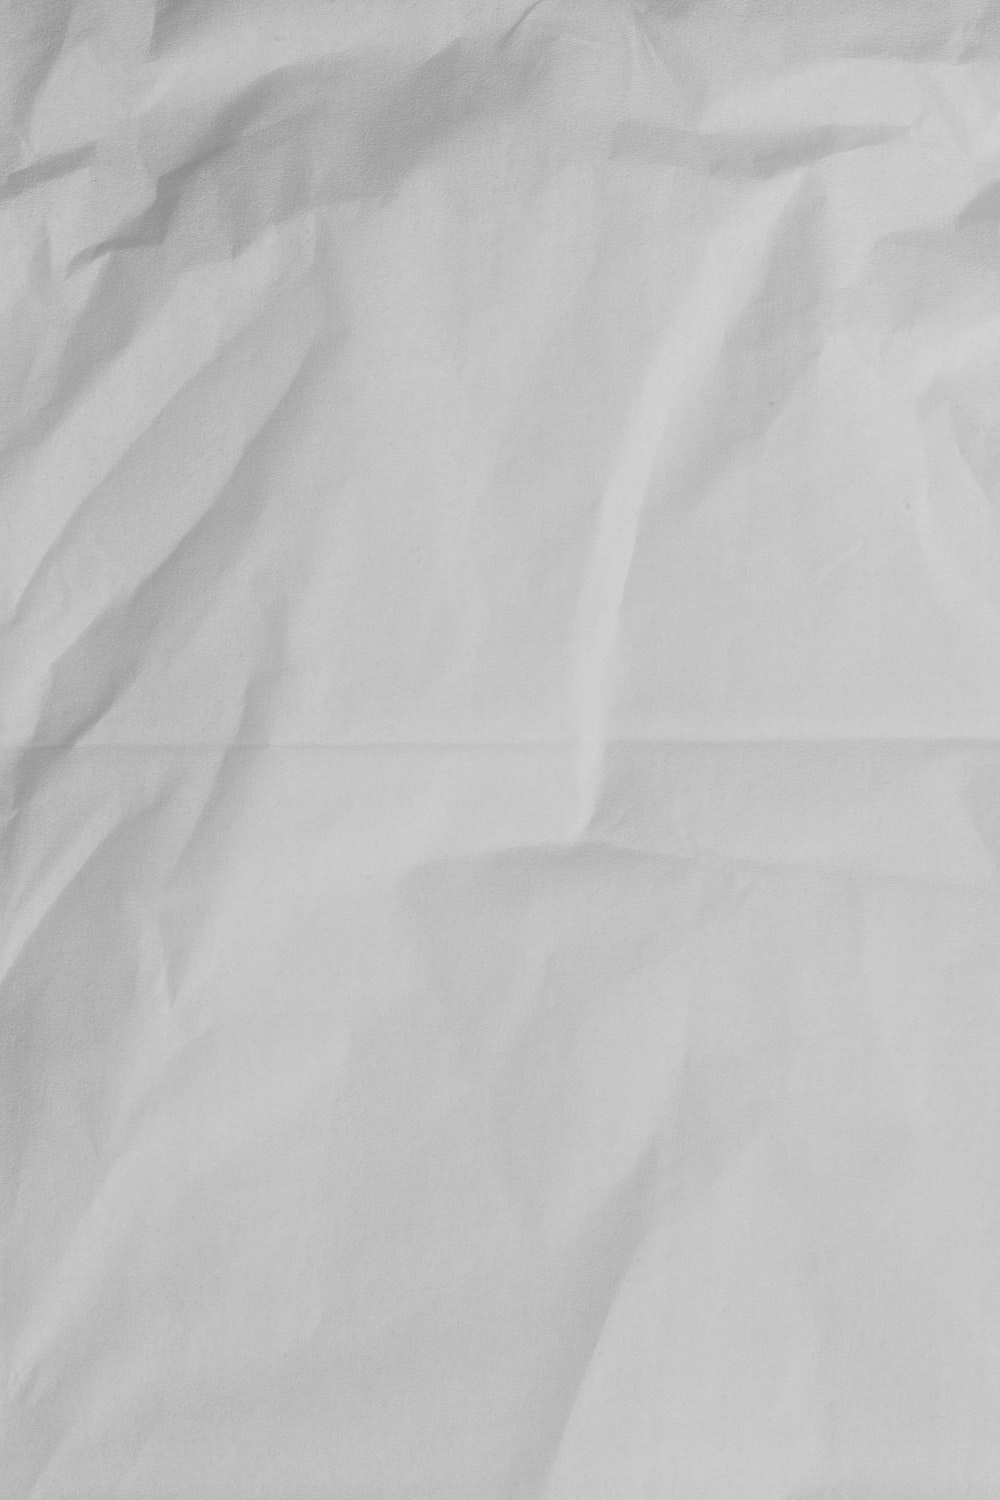 Wrinkled Paper Picture. Download Free Image